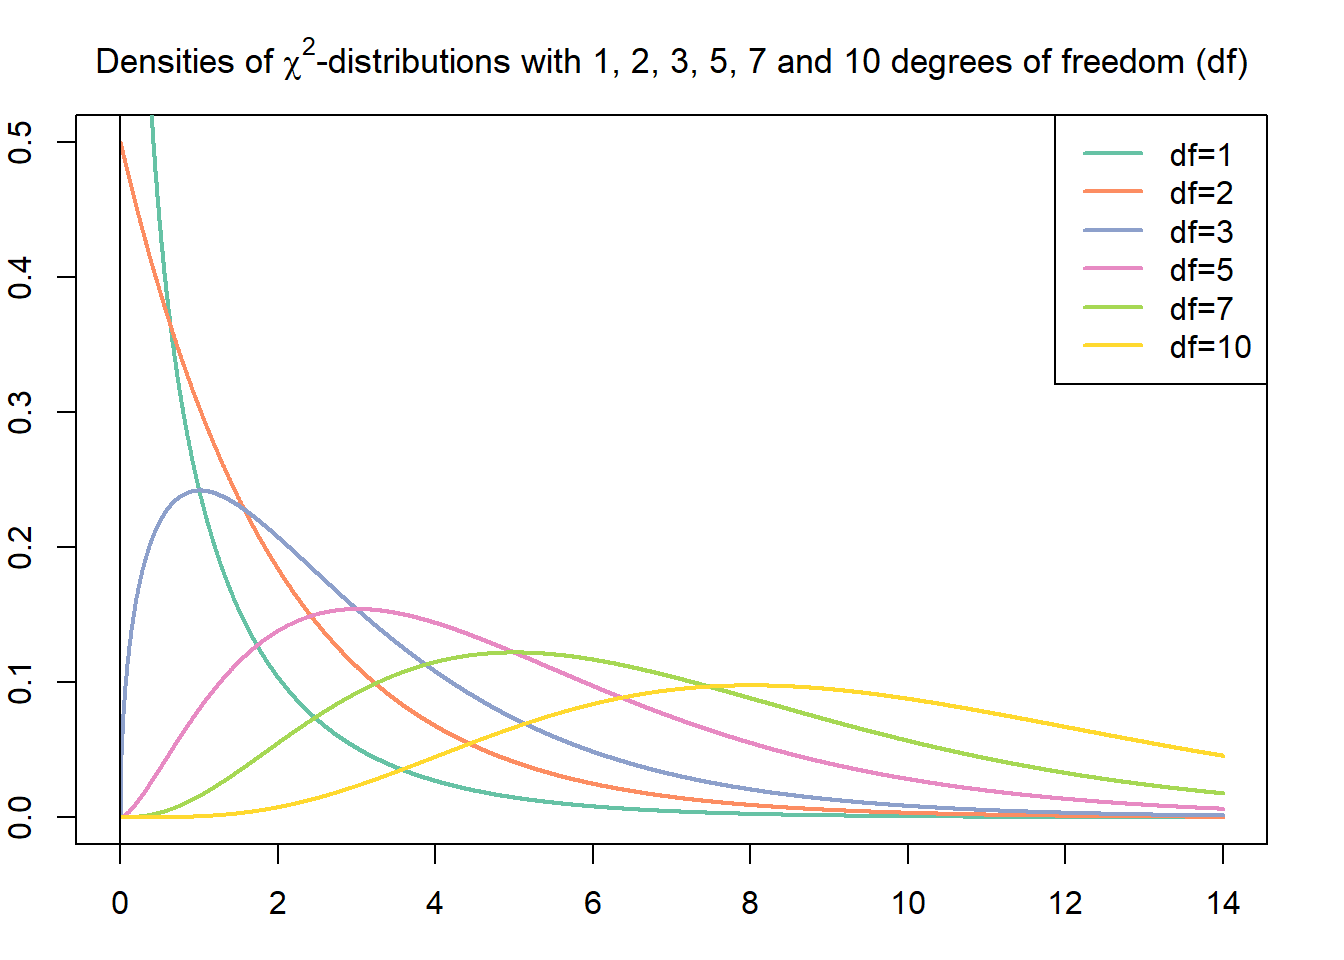 Figure of several chi squared probability density functions for various degrees of freedoms (namely: 1, 2, 3, 5, 7 and 10)